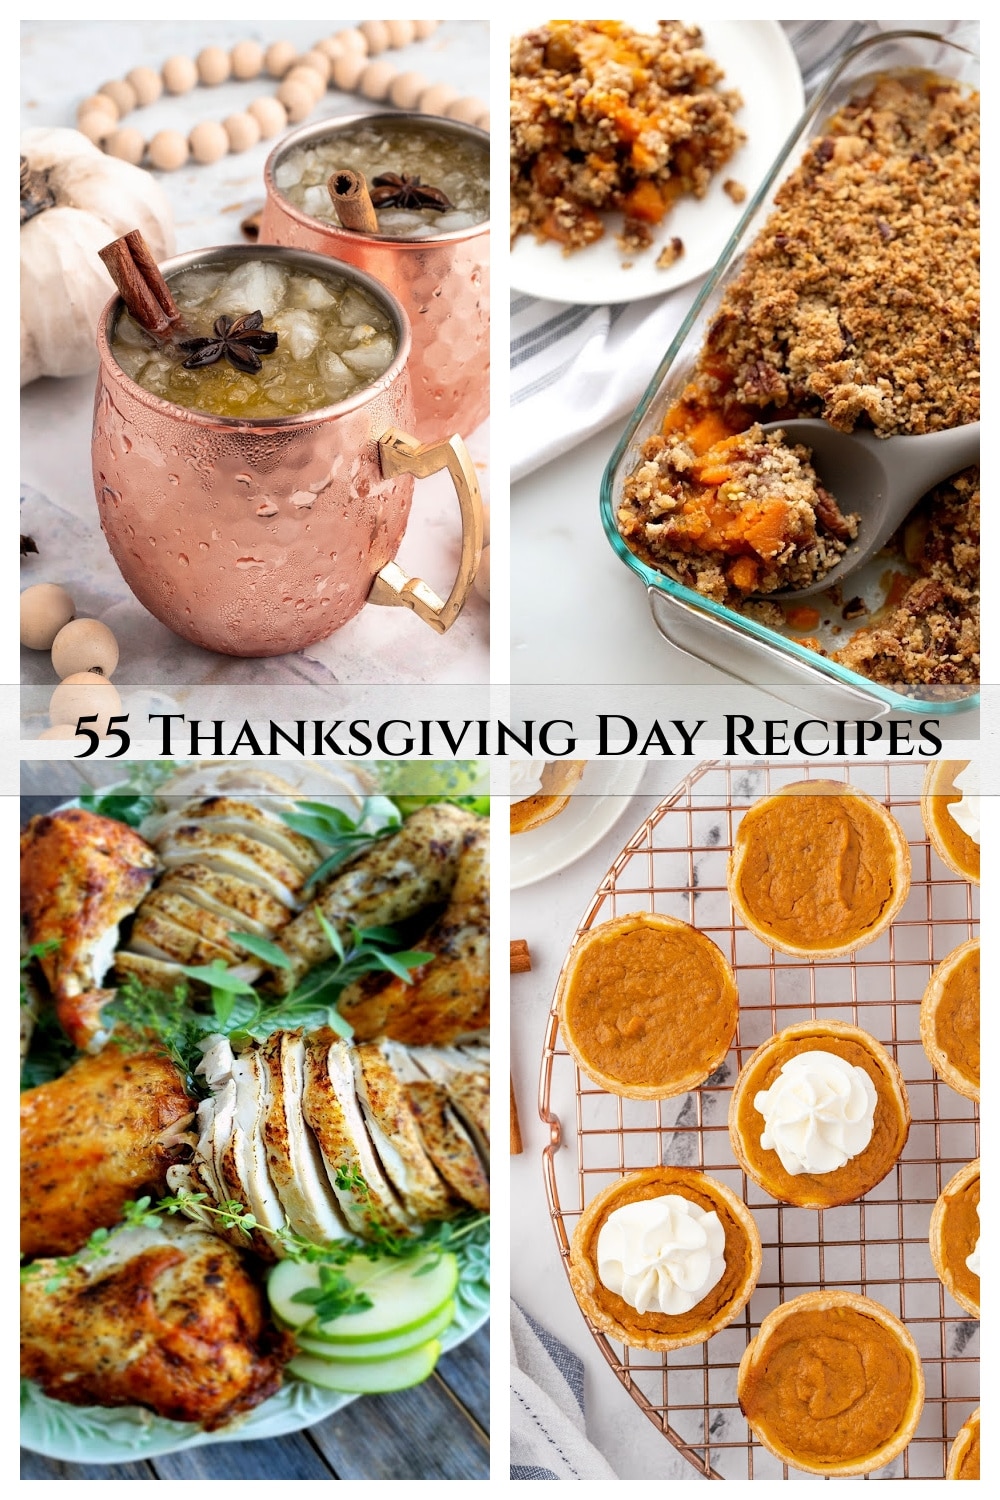 All your favorite and festive Thanksgiving dinner recipes in one place, ready and waiting for you to make them for your family and friends. These dishes combine plenty of pizzazz with a whole lot of simplicity. via @cmpollak1